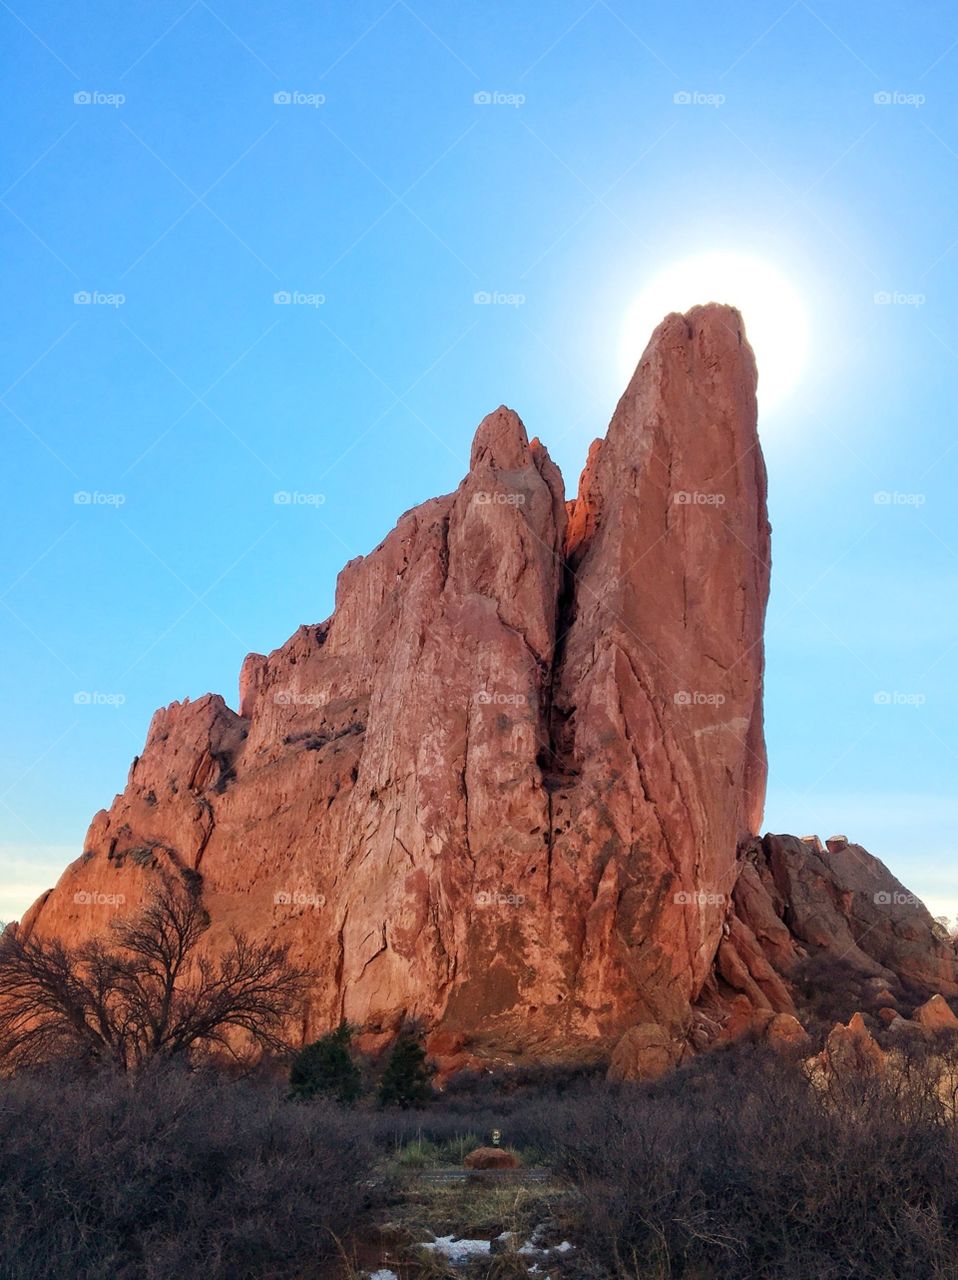 It’s a mid-afternoon day during winter. A red-rock formation is illuminated by the sun that is just barely obscured by one of its apexes. The sky is a true sky blue. There is shrubbery at its base. A bit of snow from the last snowfall lingers.